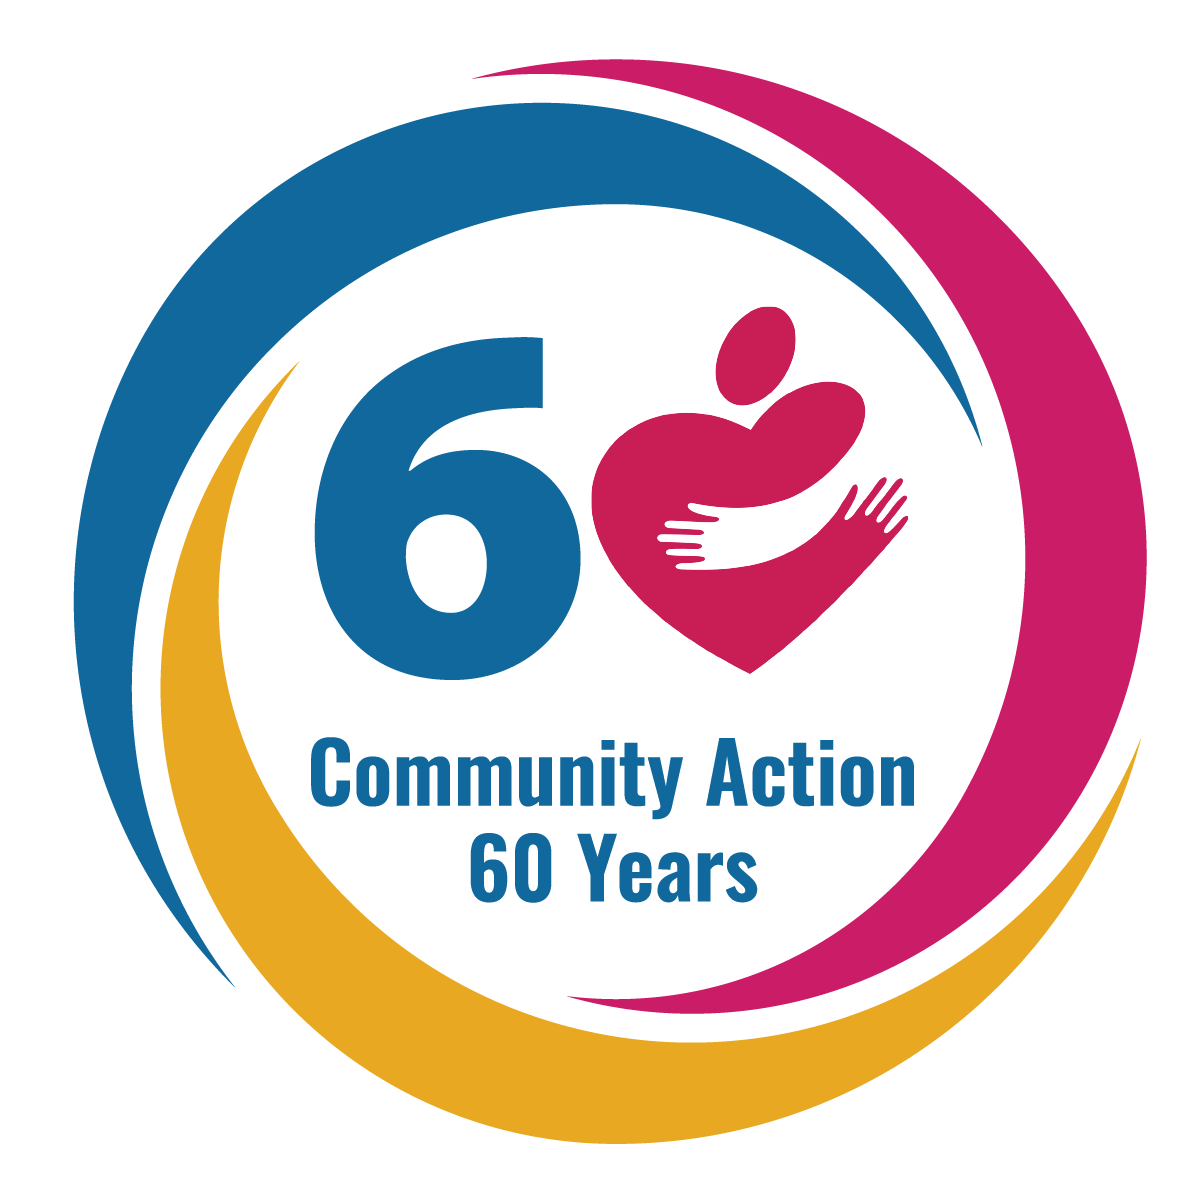 Community Action for 60 Years